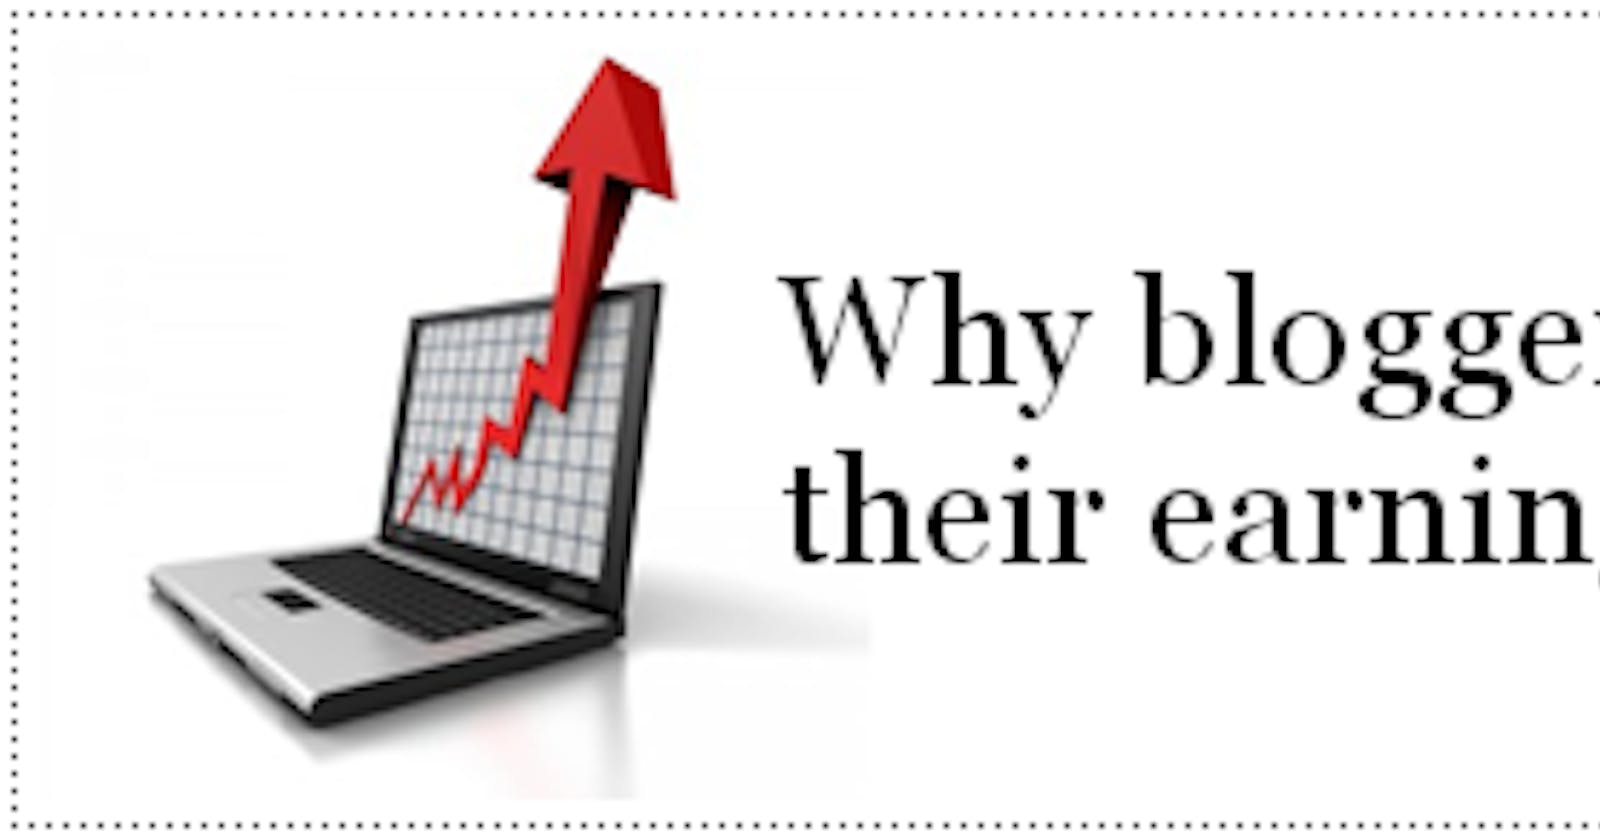 Why bloggers shouldn’t share their earnings with the world?